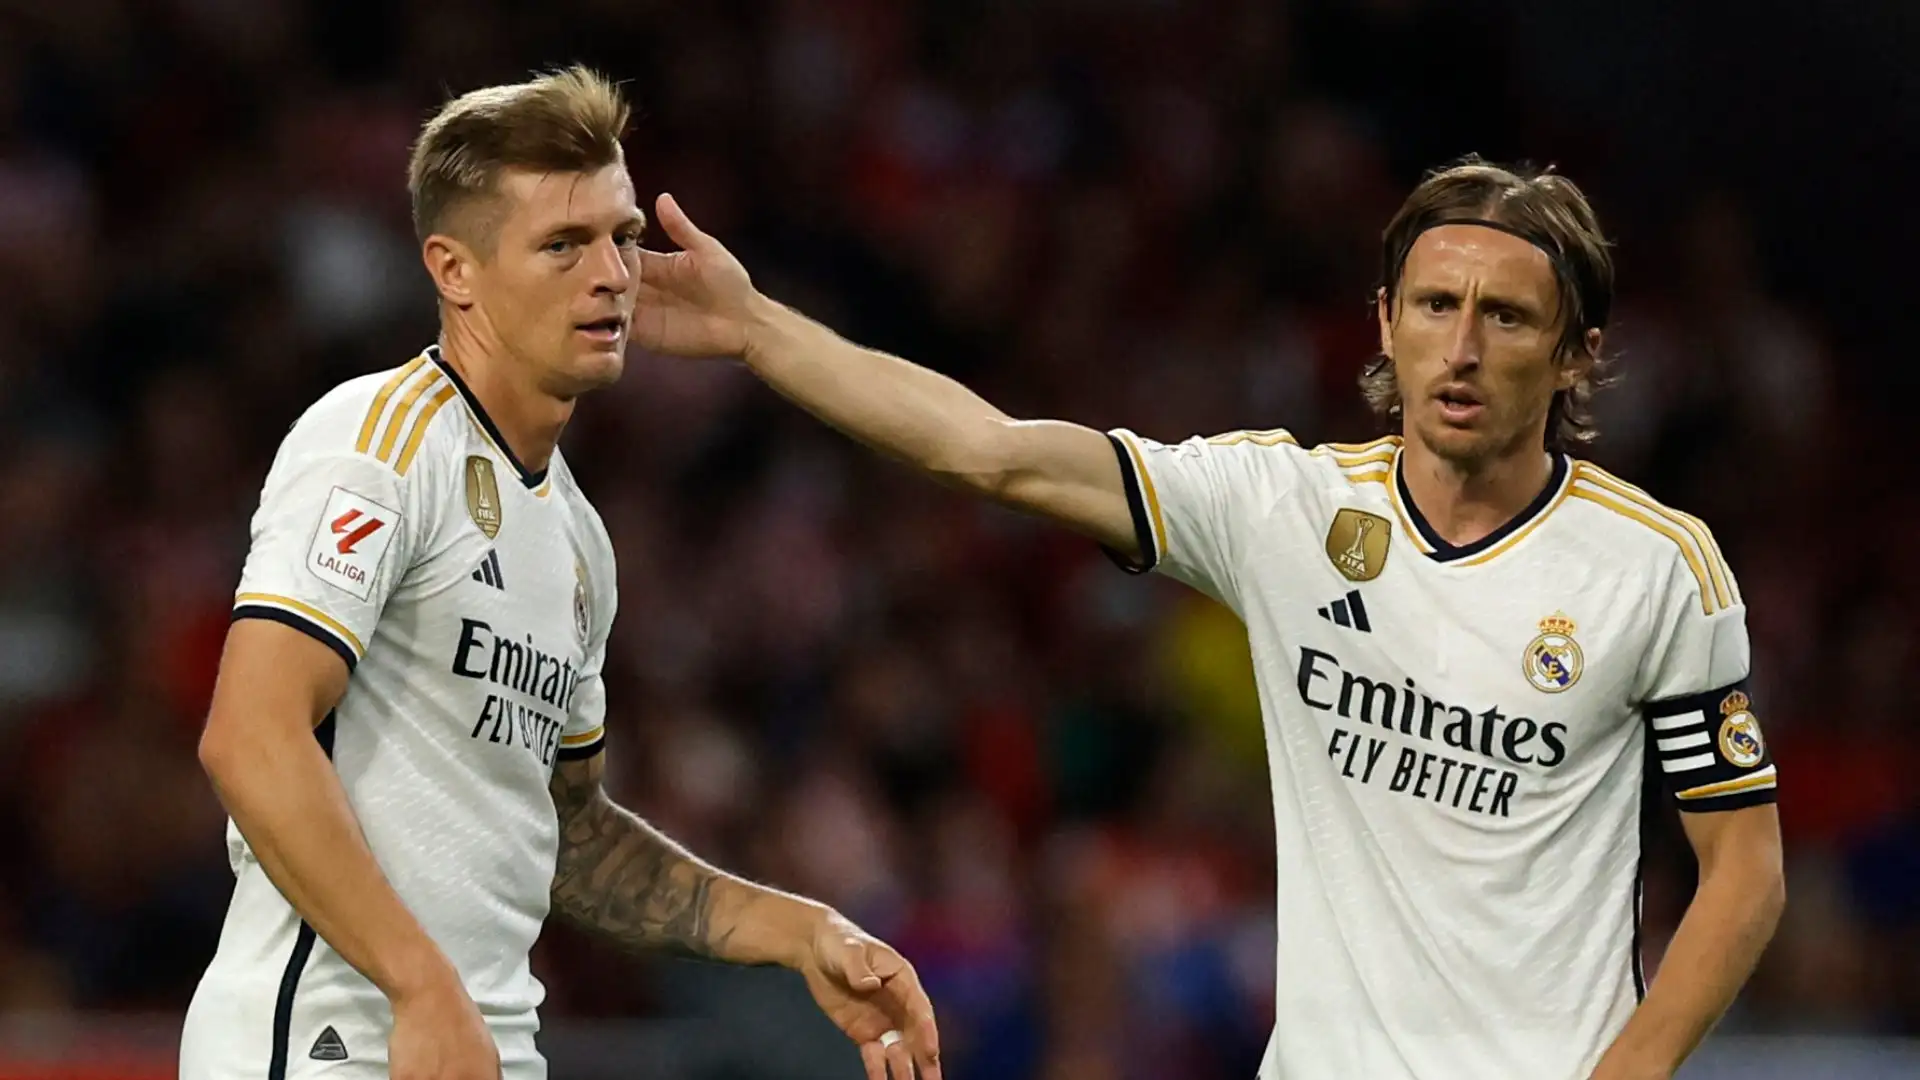 The end of an era? Luka Modric and Toni Kroos expected to leave Real Madrid despite La Liga title success and Champions League final spot